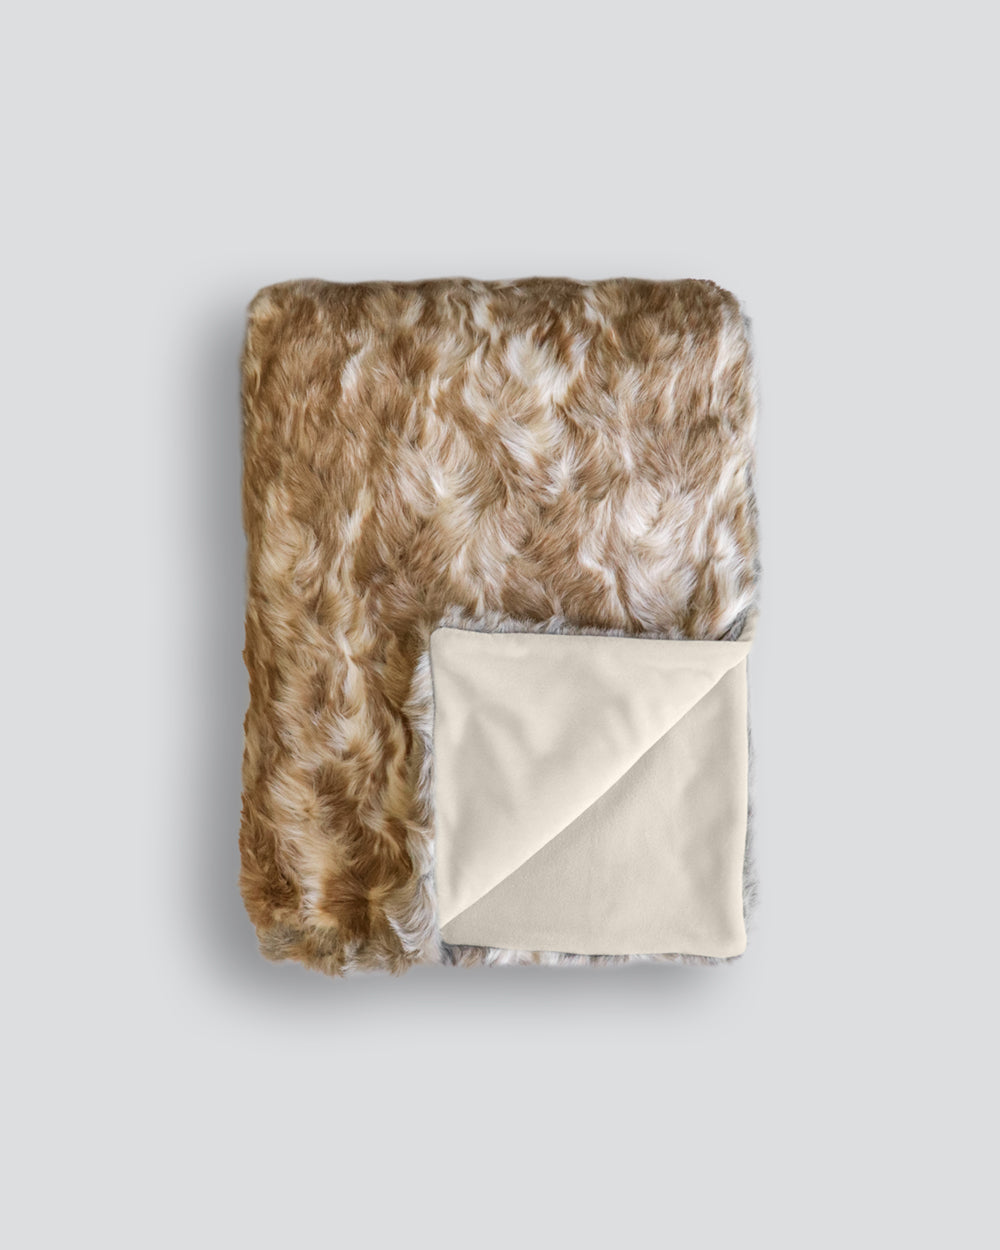 Heirloom Vintage Squirrel Fawn Throw Rug Blanket in Faux Fur is available from Make Your House A Home Premium Stockist. Furniture Store Bendigo, Victoria. Australia Wide Delivery.